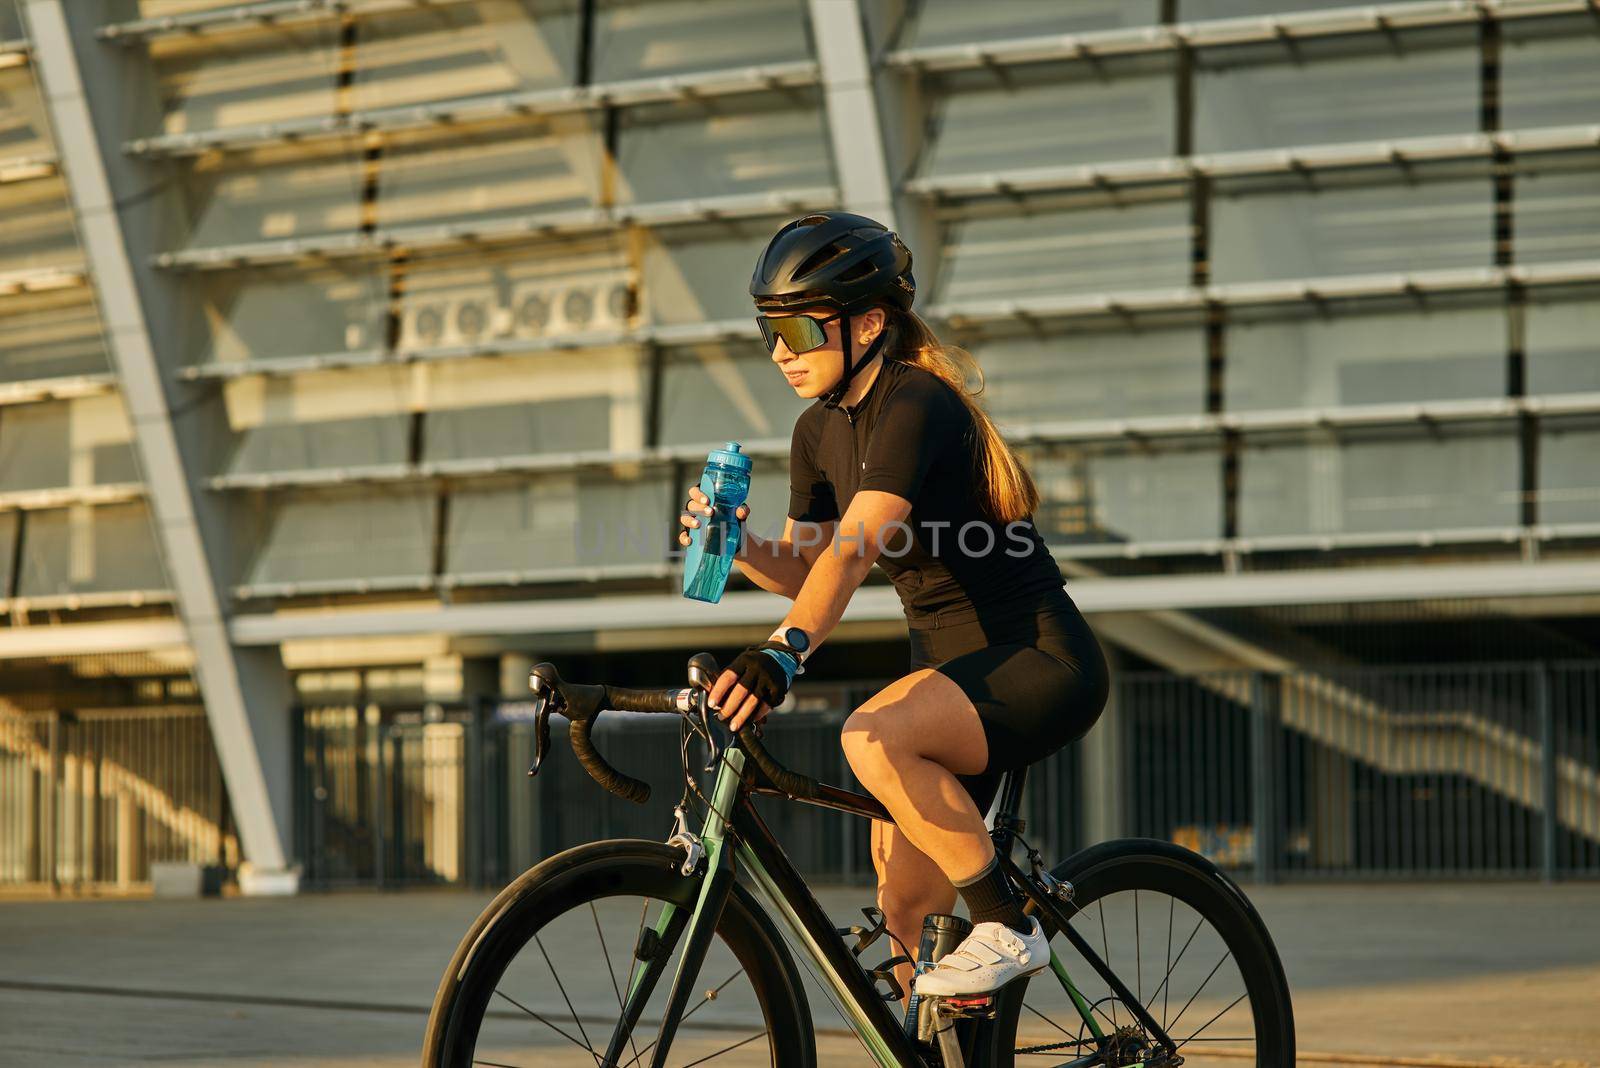 Professional female cyclist in black cycling garment and protective gear holding water bottle while riding bicycle in city, training outdoors at sunset by friendsstock